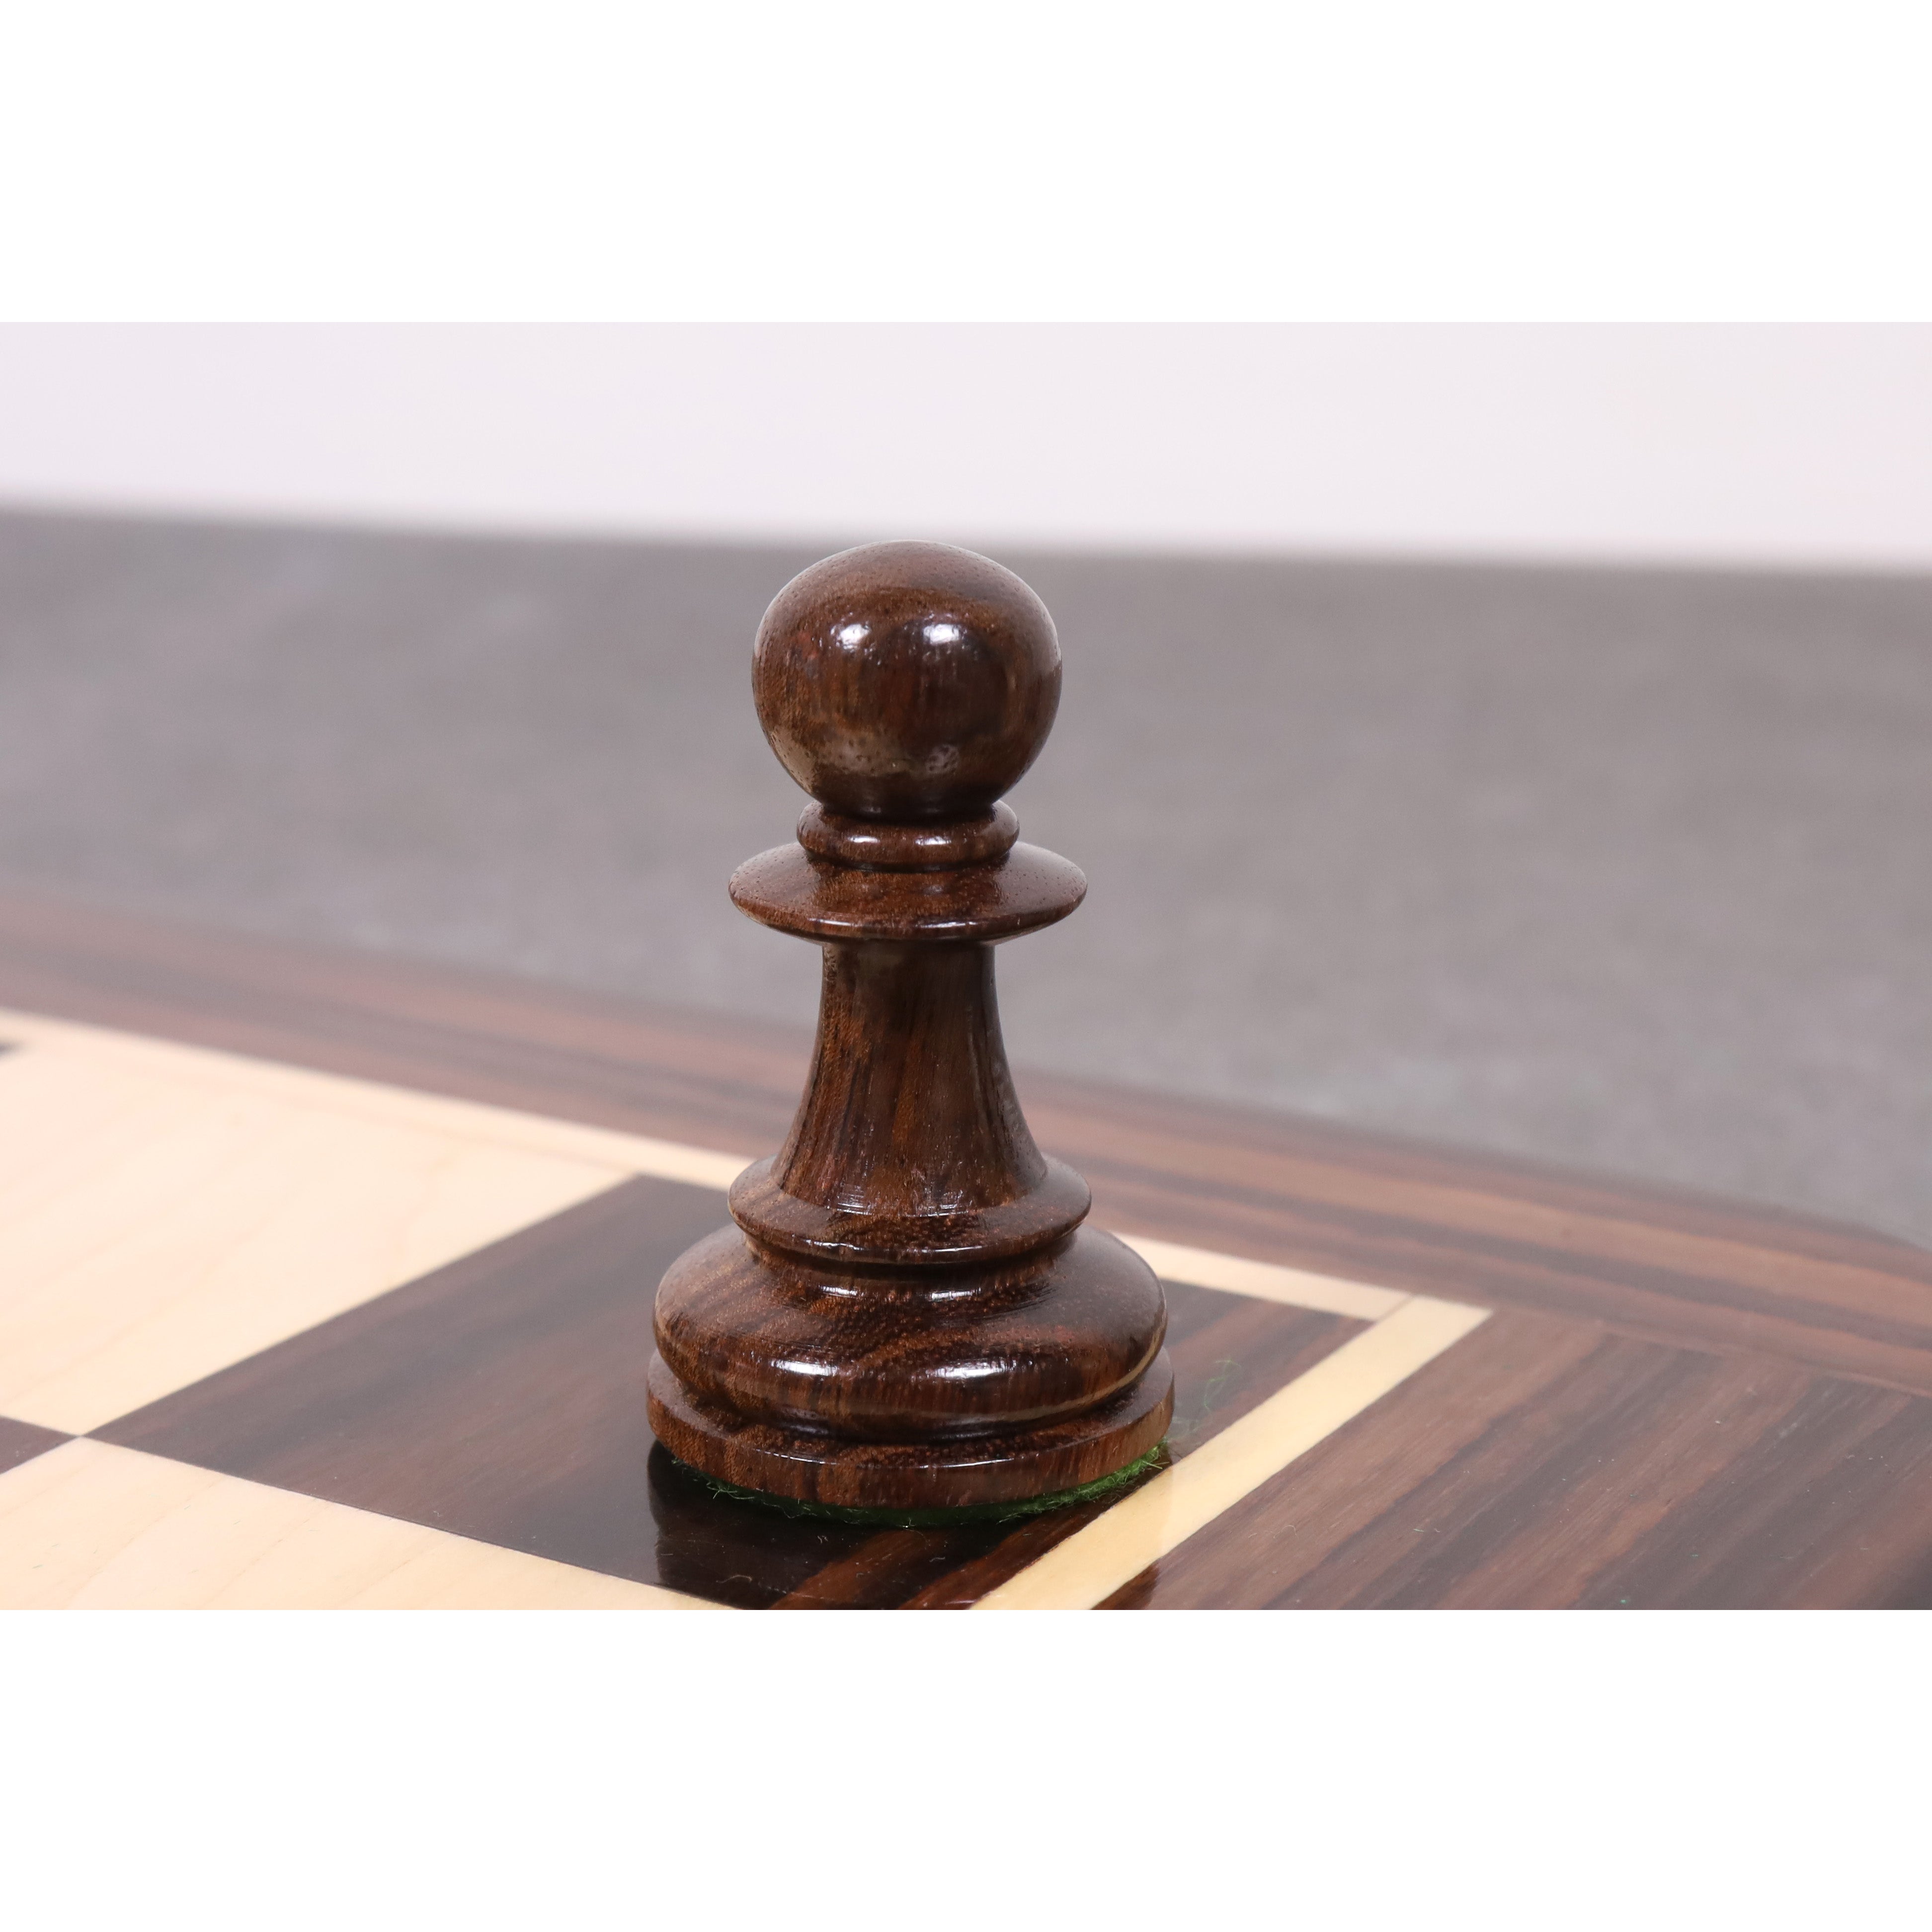 3.5" Persian Knight Staunton Chess | Wood Chess Sets | Wooden Chess Pieces